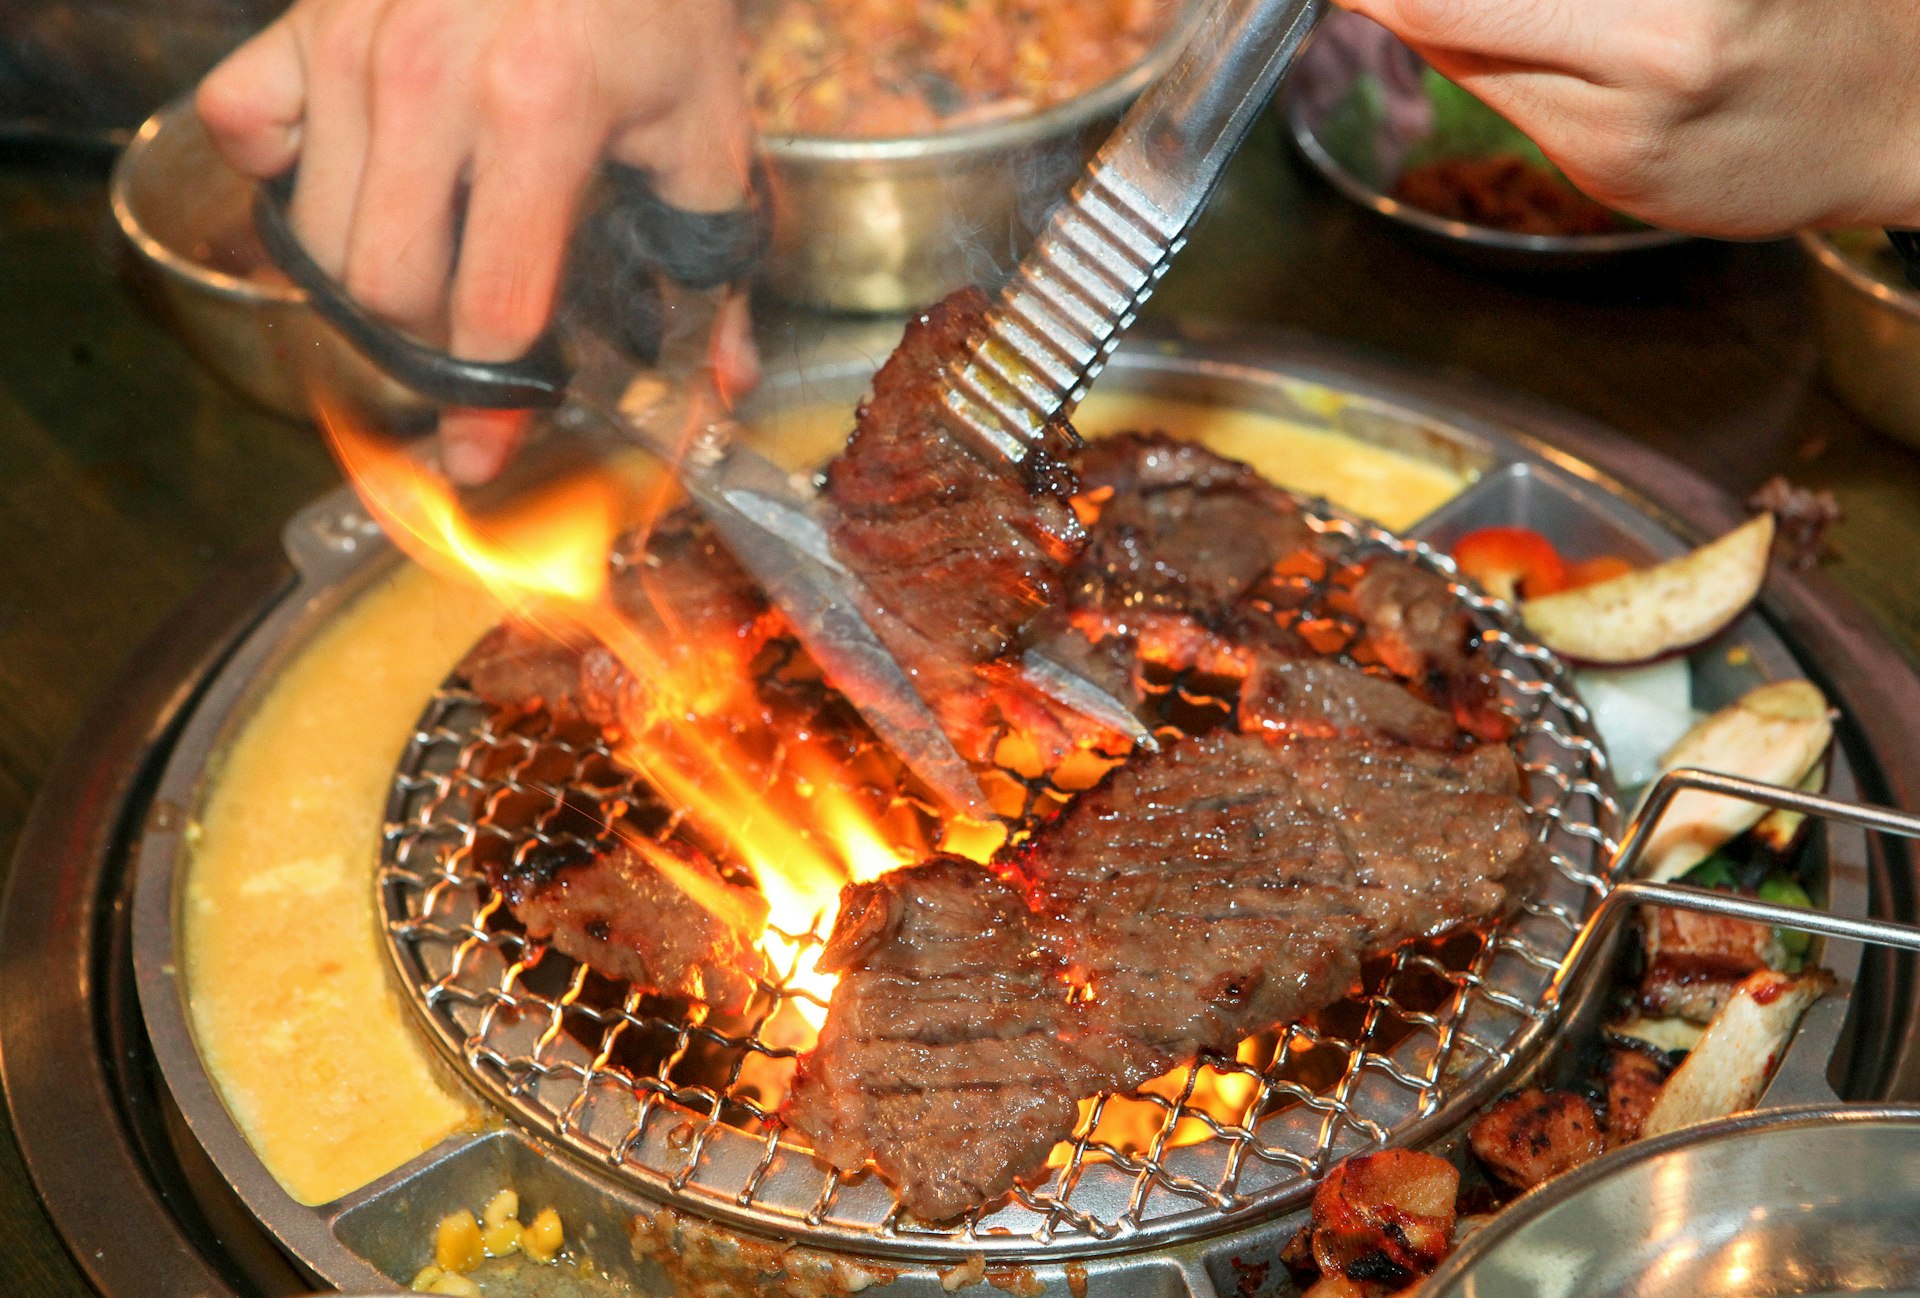 A patron cuts galbi beef into smaller pieces as it cooks on a burner at his table at a Korean BBQ restaurant